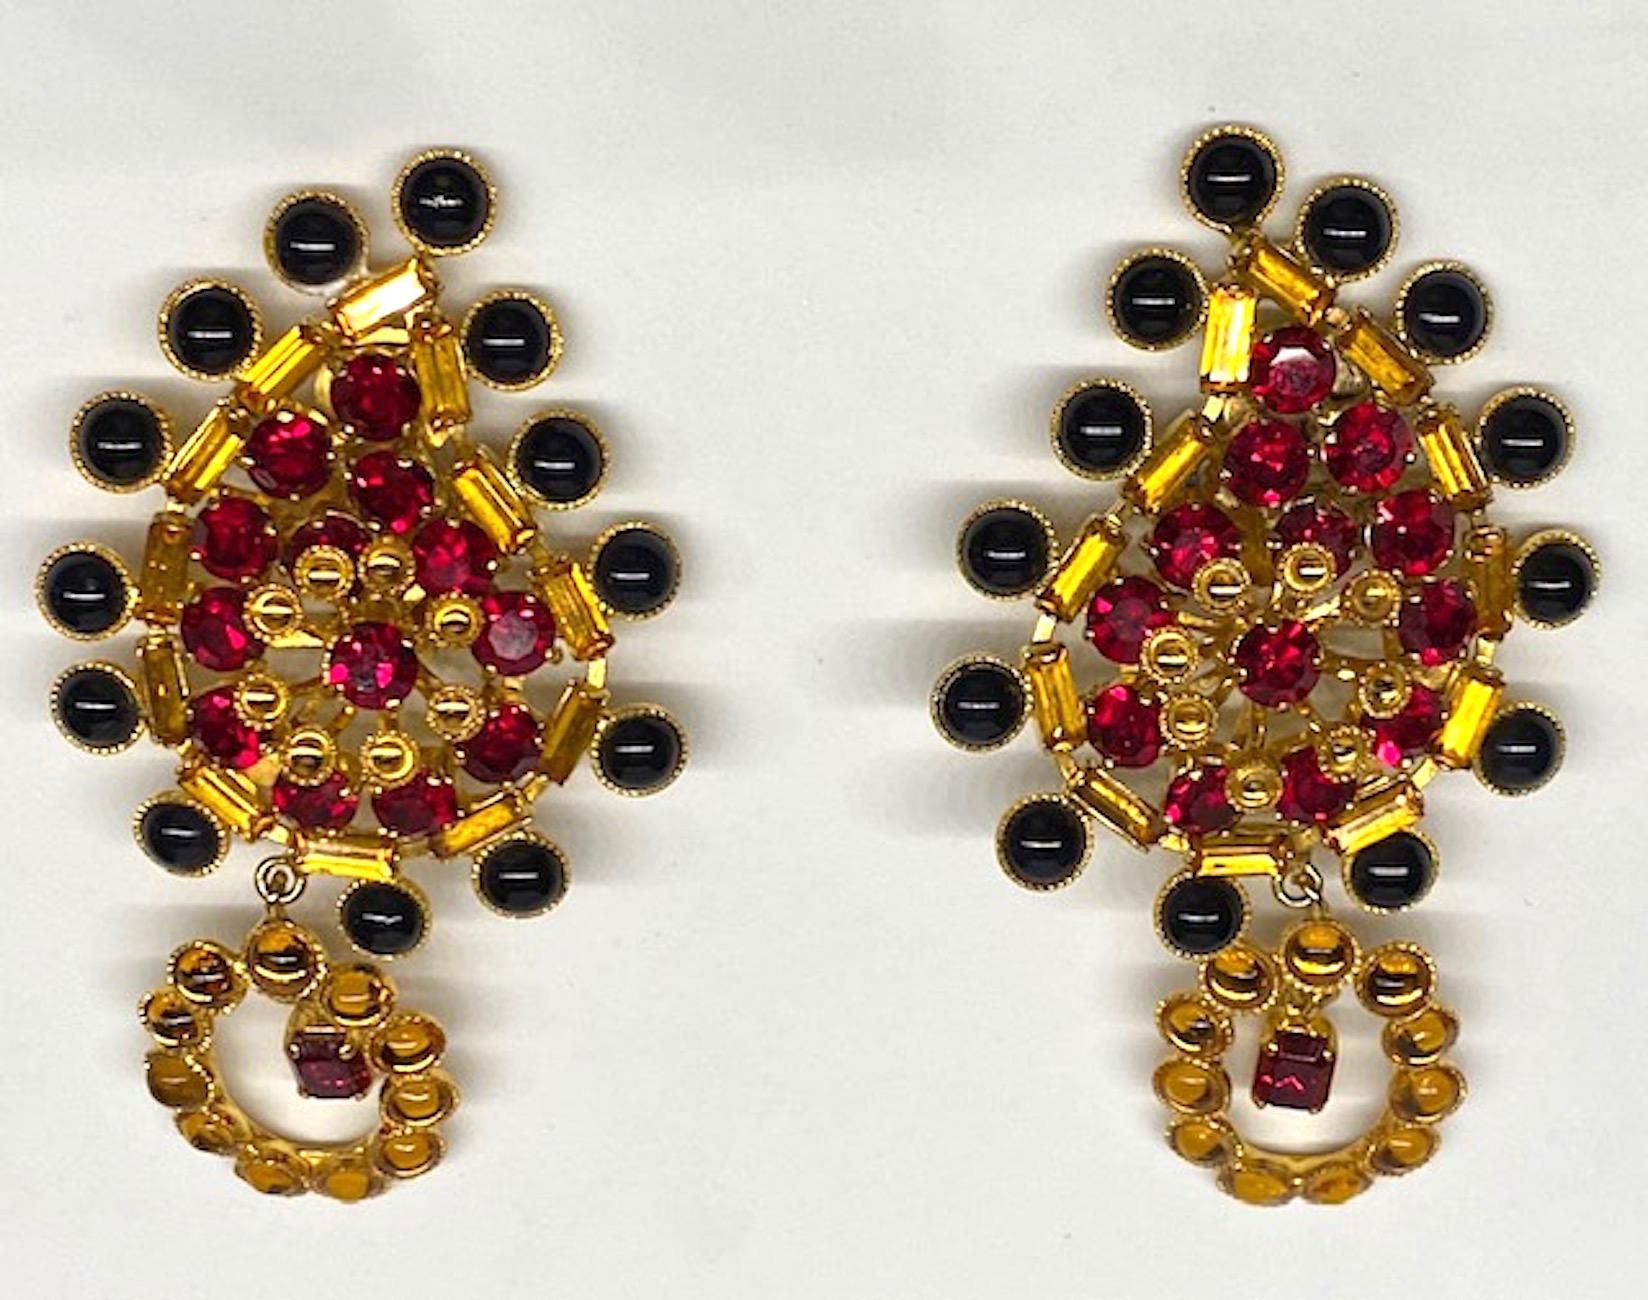 A chick pair of 1980s large cabochon and rhinestone earrings by Di Liguoro of Italy. The large black and smaller gold cabochons are glass as are the gold baguette and round red rhinestones. All beautifully set into a shiny gold tone setting. The top